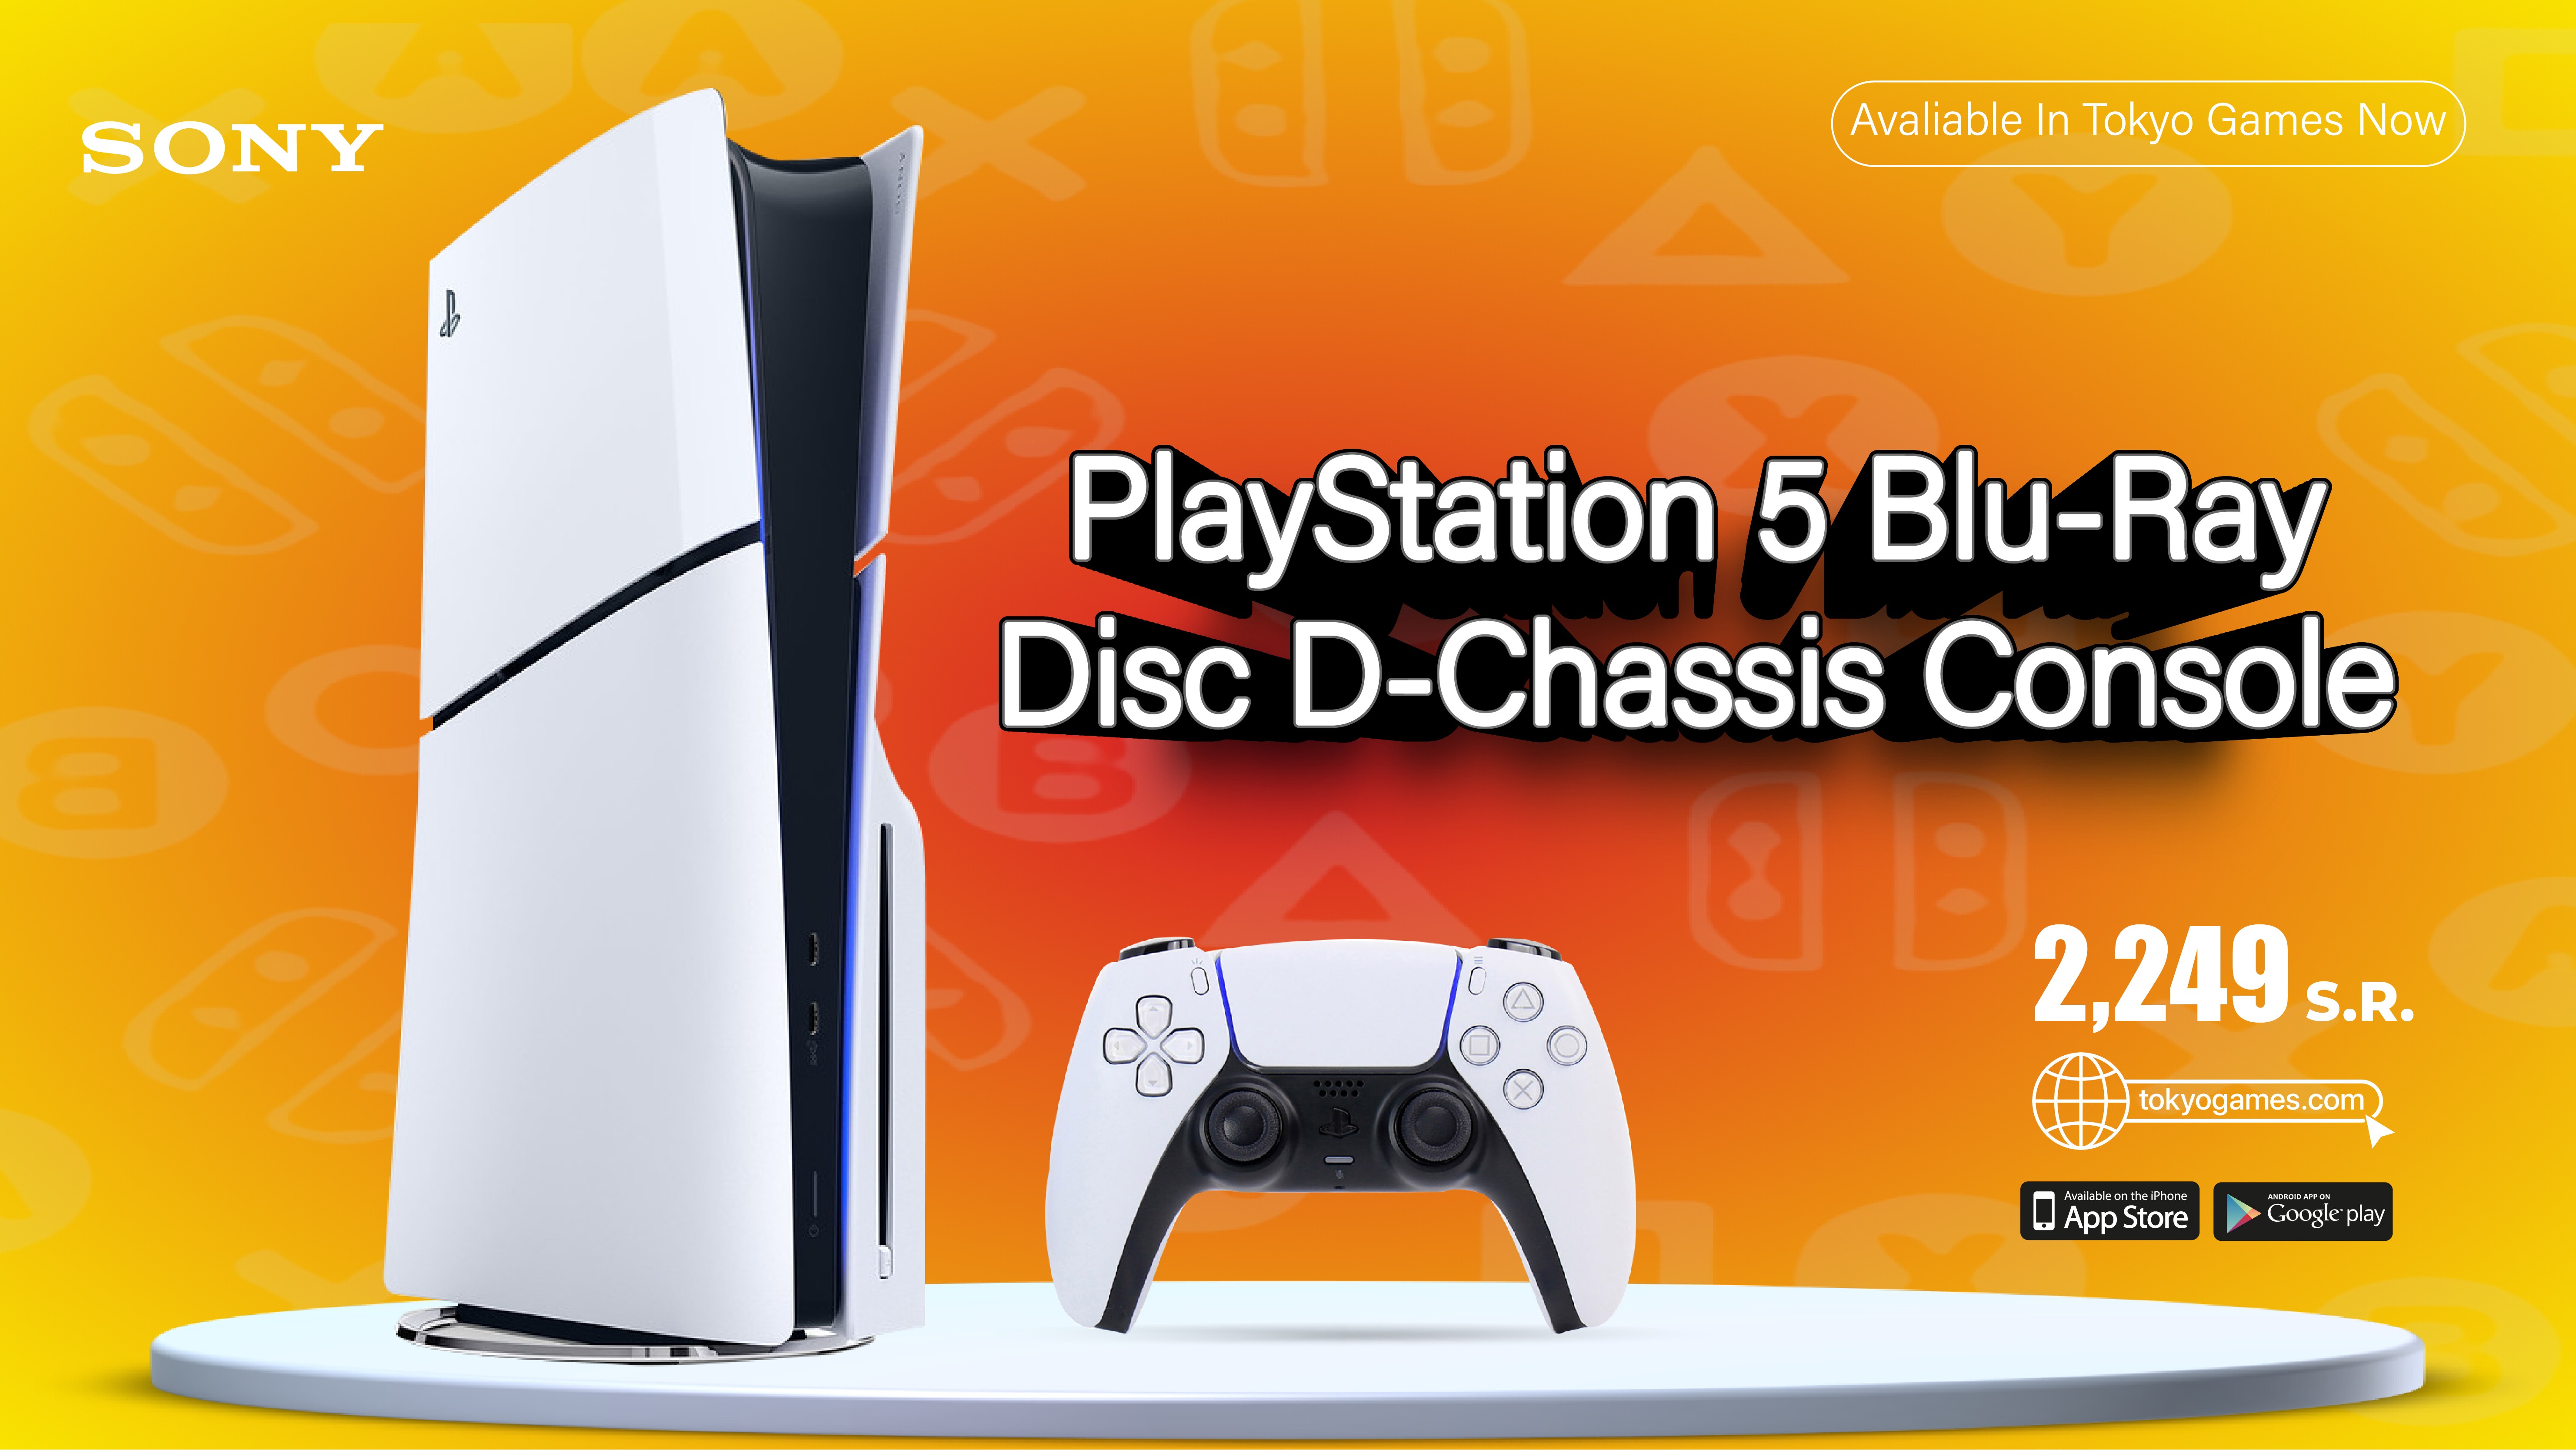 PlayStation 5 Blu-Ray Disc D-Chassis Console